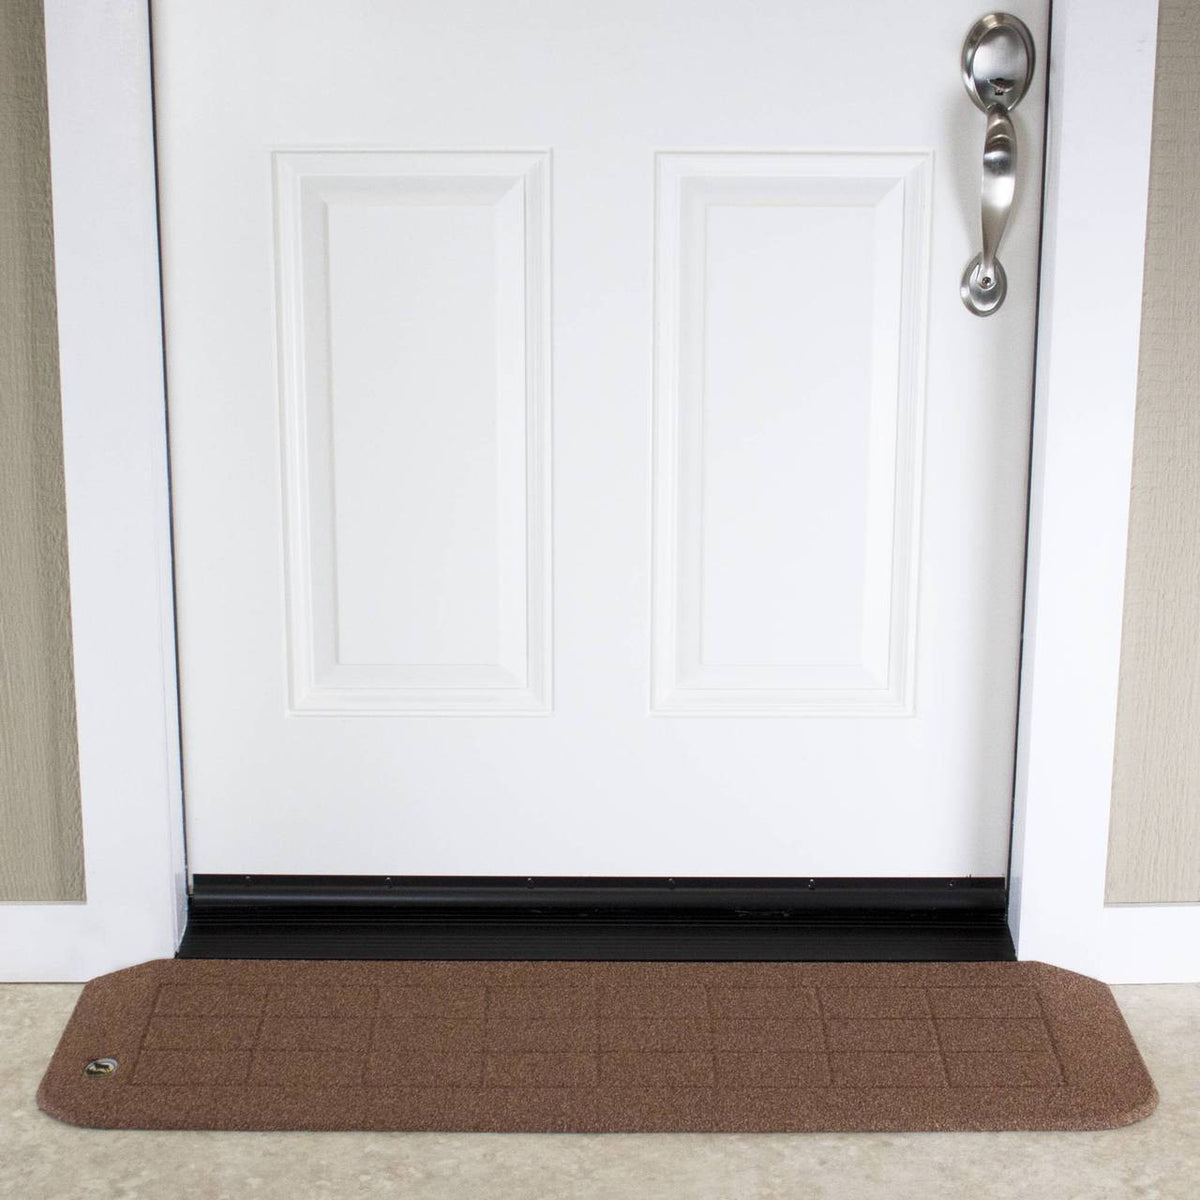 Door Threshold Ramps from Recycled Rubber